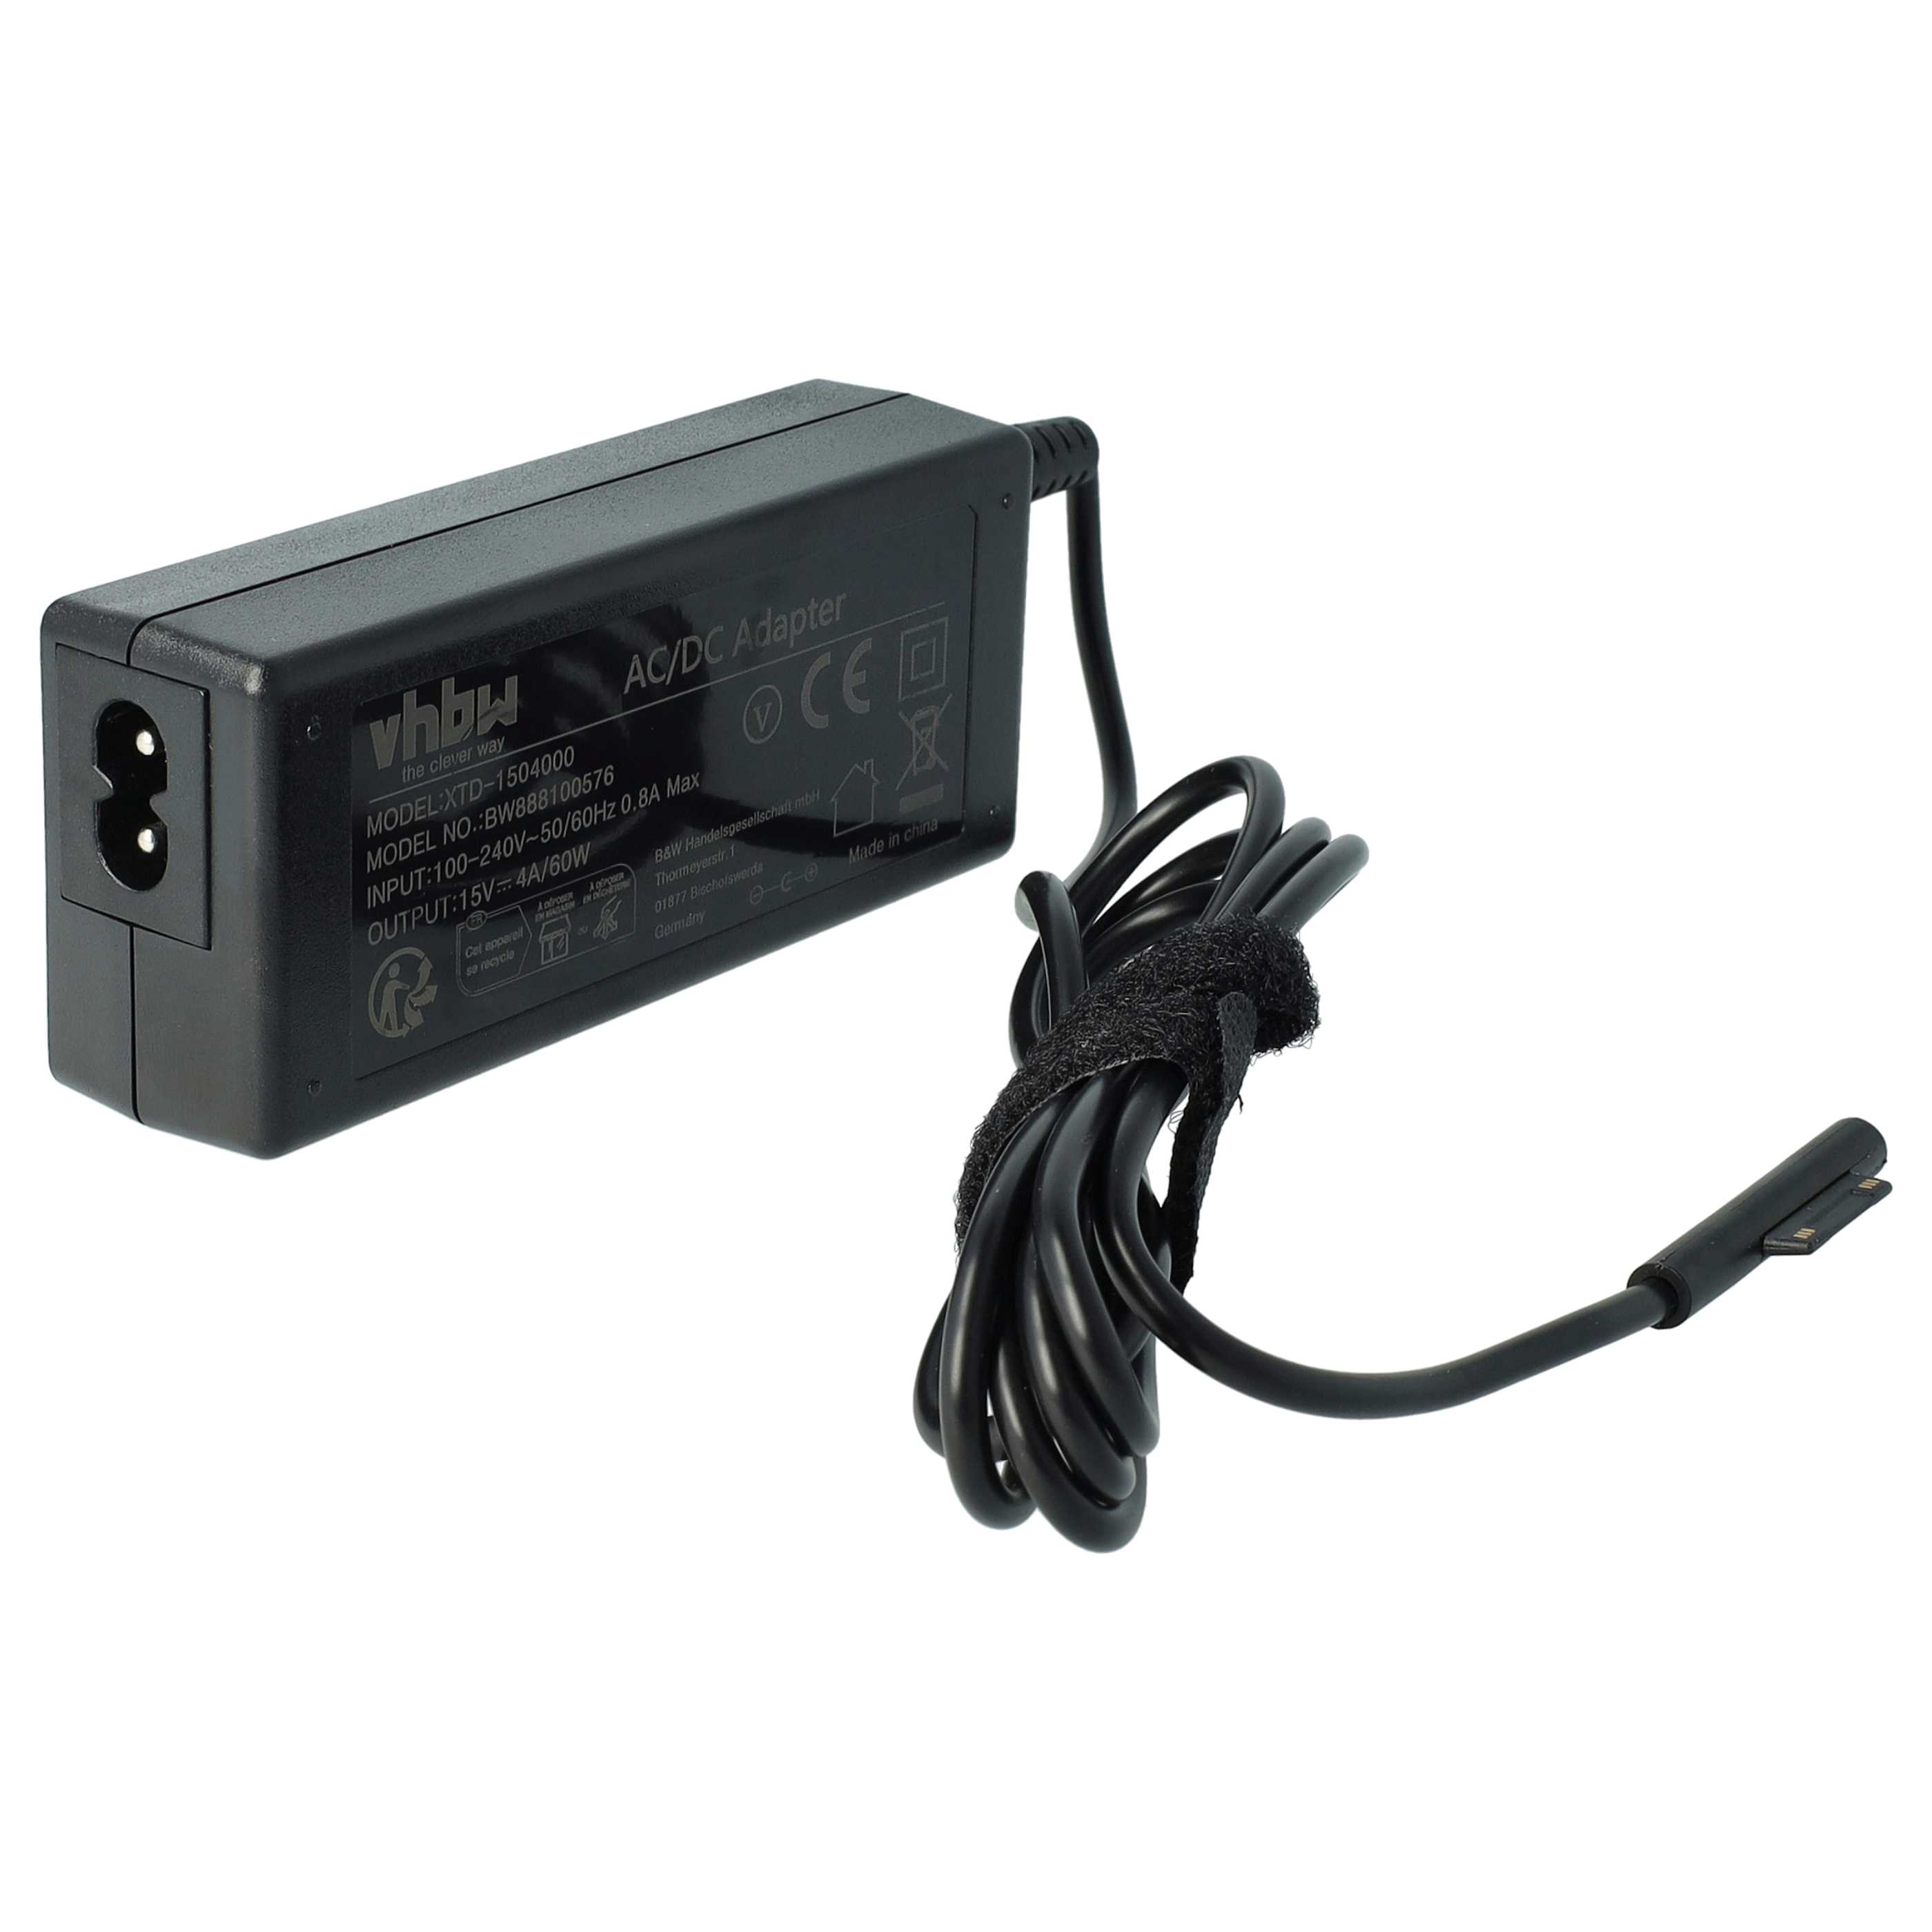 Mains Power Adapter replaces Microsoft A1706 for MicrosoftNotebook